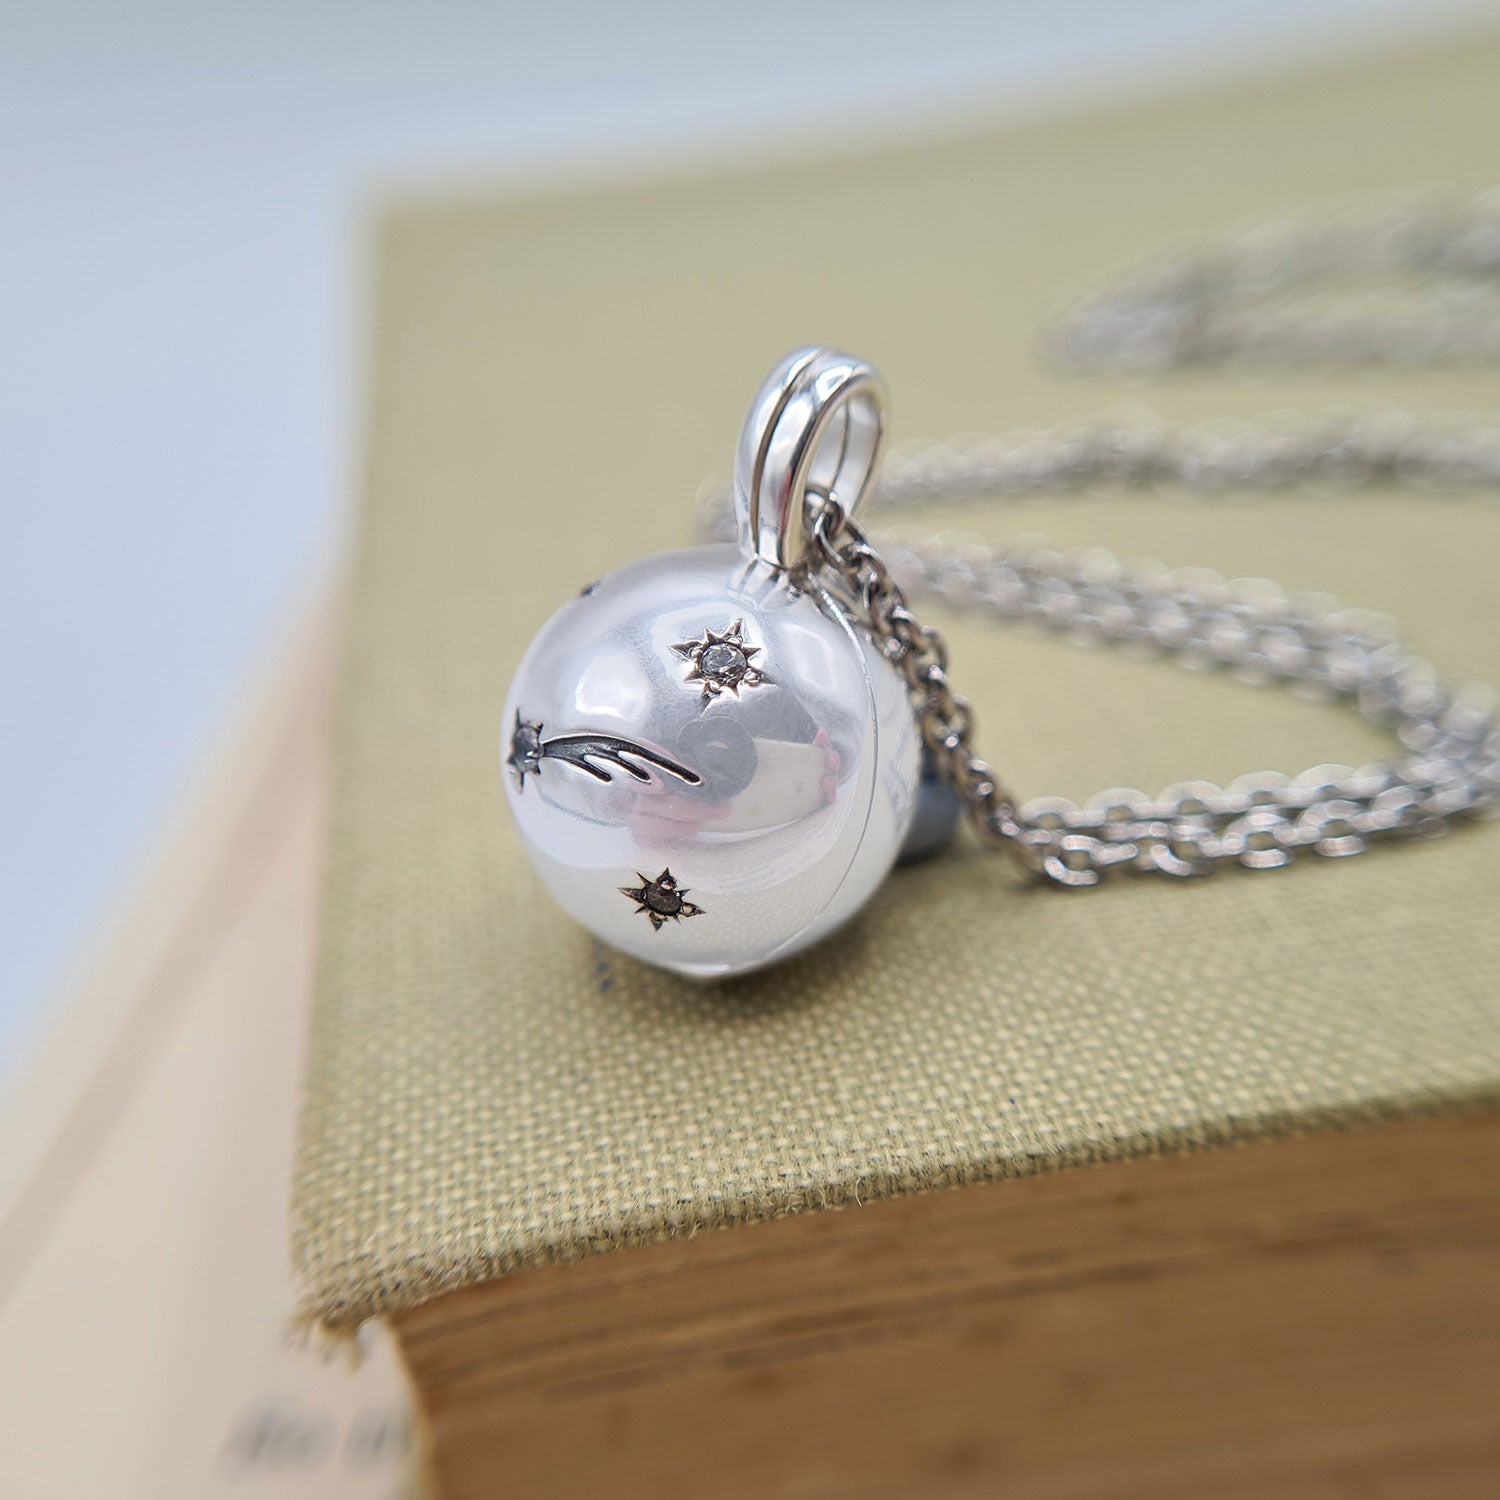 ball locket with shooting star design